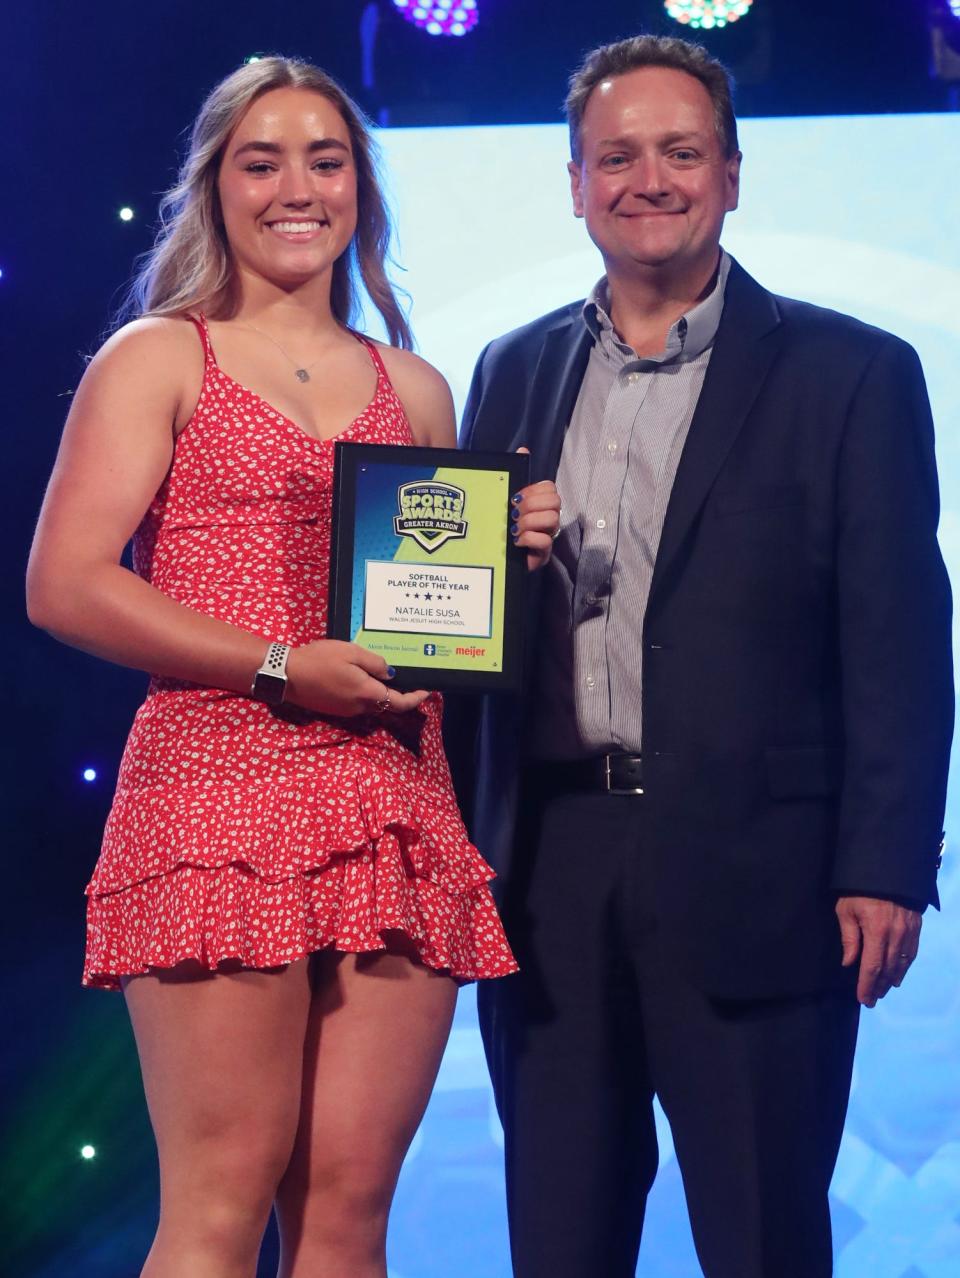 Walsh Jesuit's Natalie Susa Greater Akron Softball Player of the Year with Michael Shearer Akron Beacon Journal editor at the High School Sports All-Star Awards at the Civic Theatre in Akron on Friday.